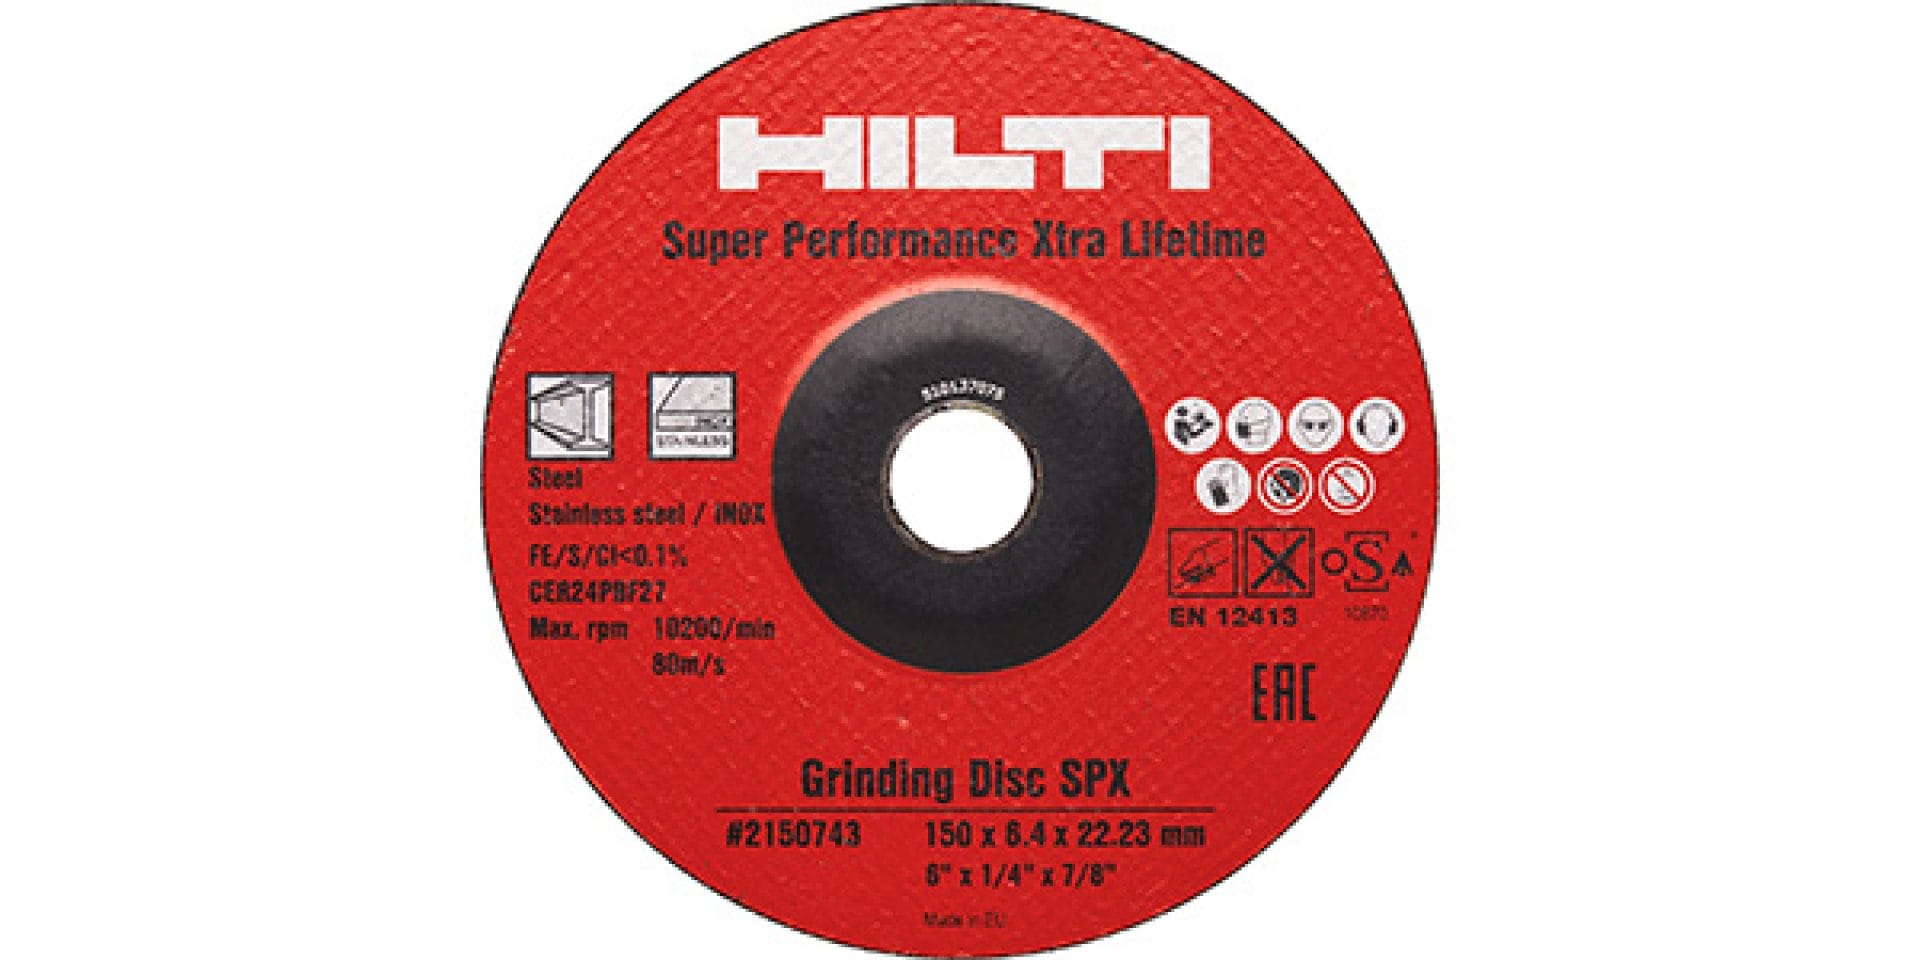 Ultimate abrasive grinding disc for metals featuring super-high removal rate and extra-long lifetime.